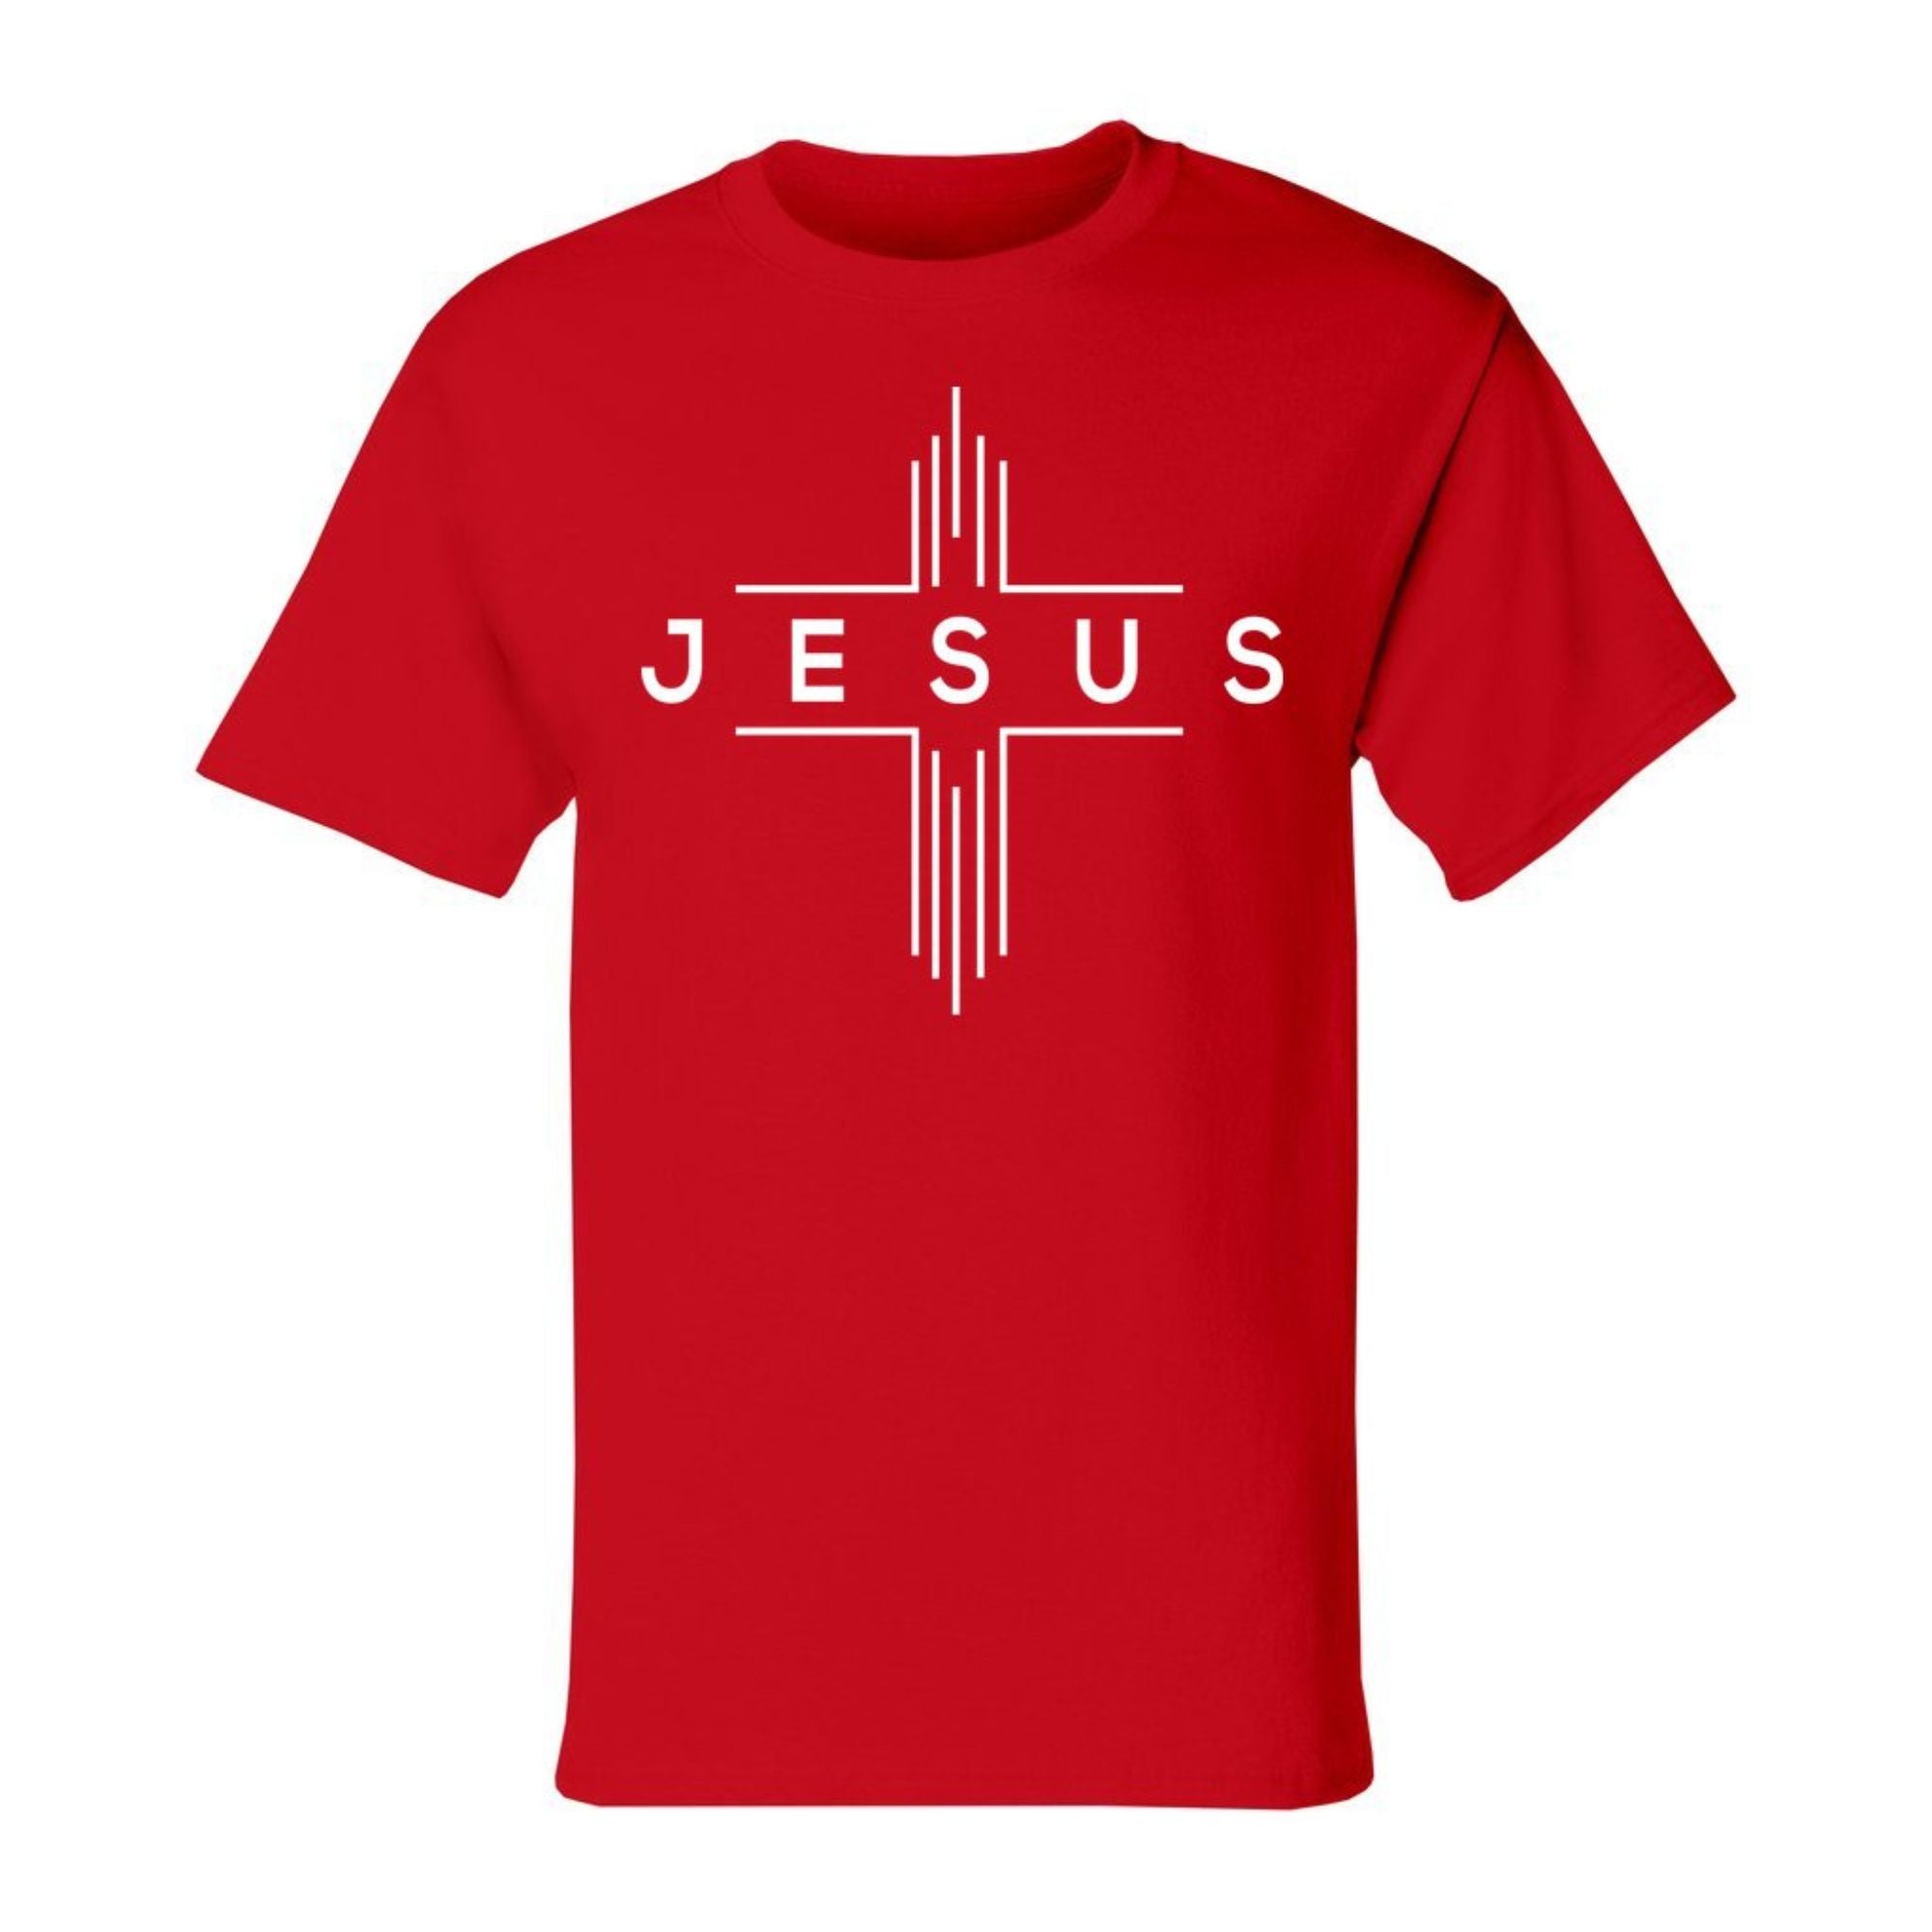 Jesus Cheveron Cross Women's Unisex Champion T-shirt - Black / Red - Matching Joggers Available Size: S Color: Red Jesus Passion Apparel